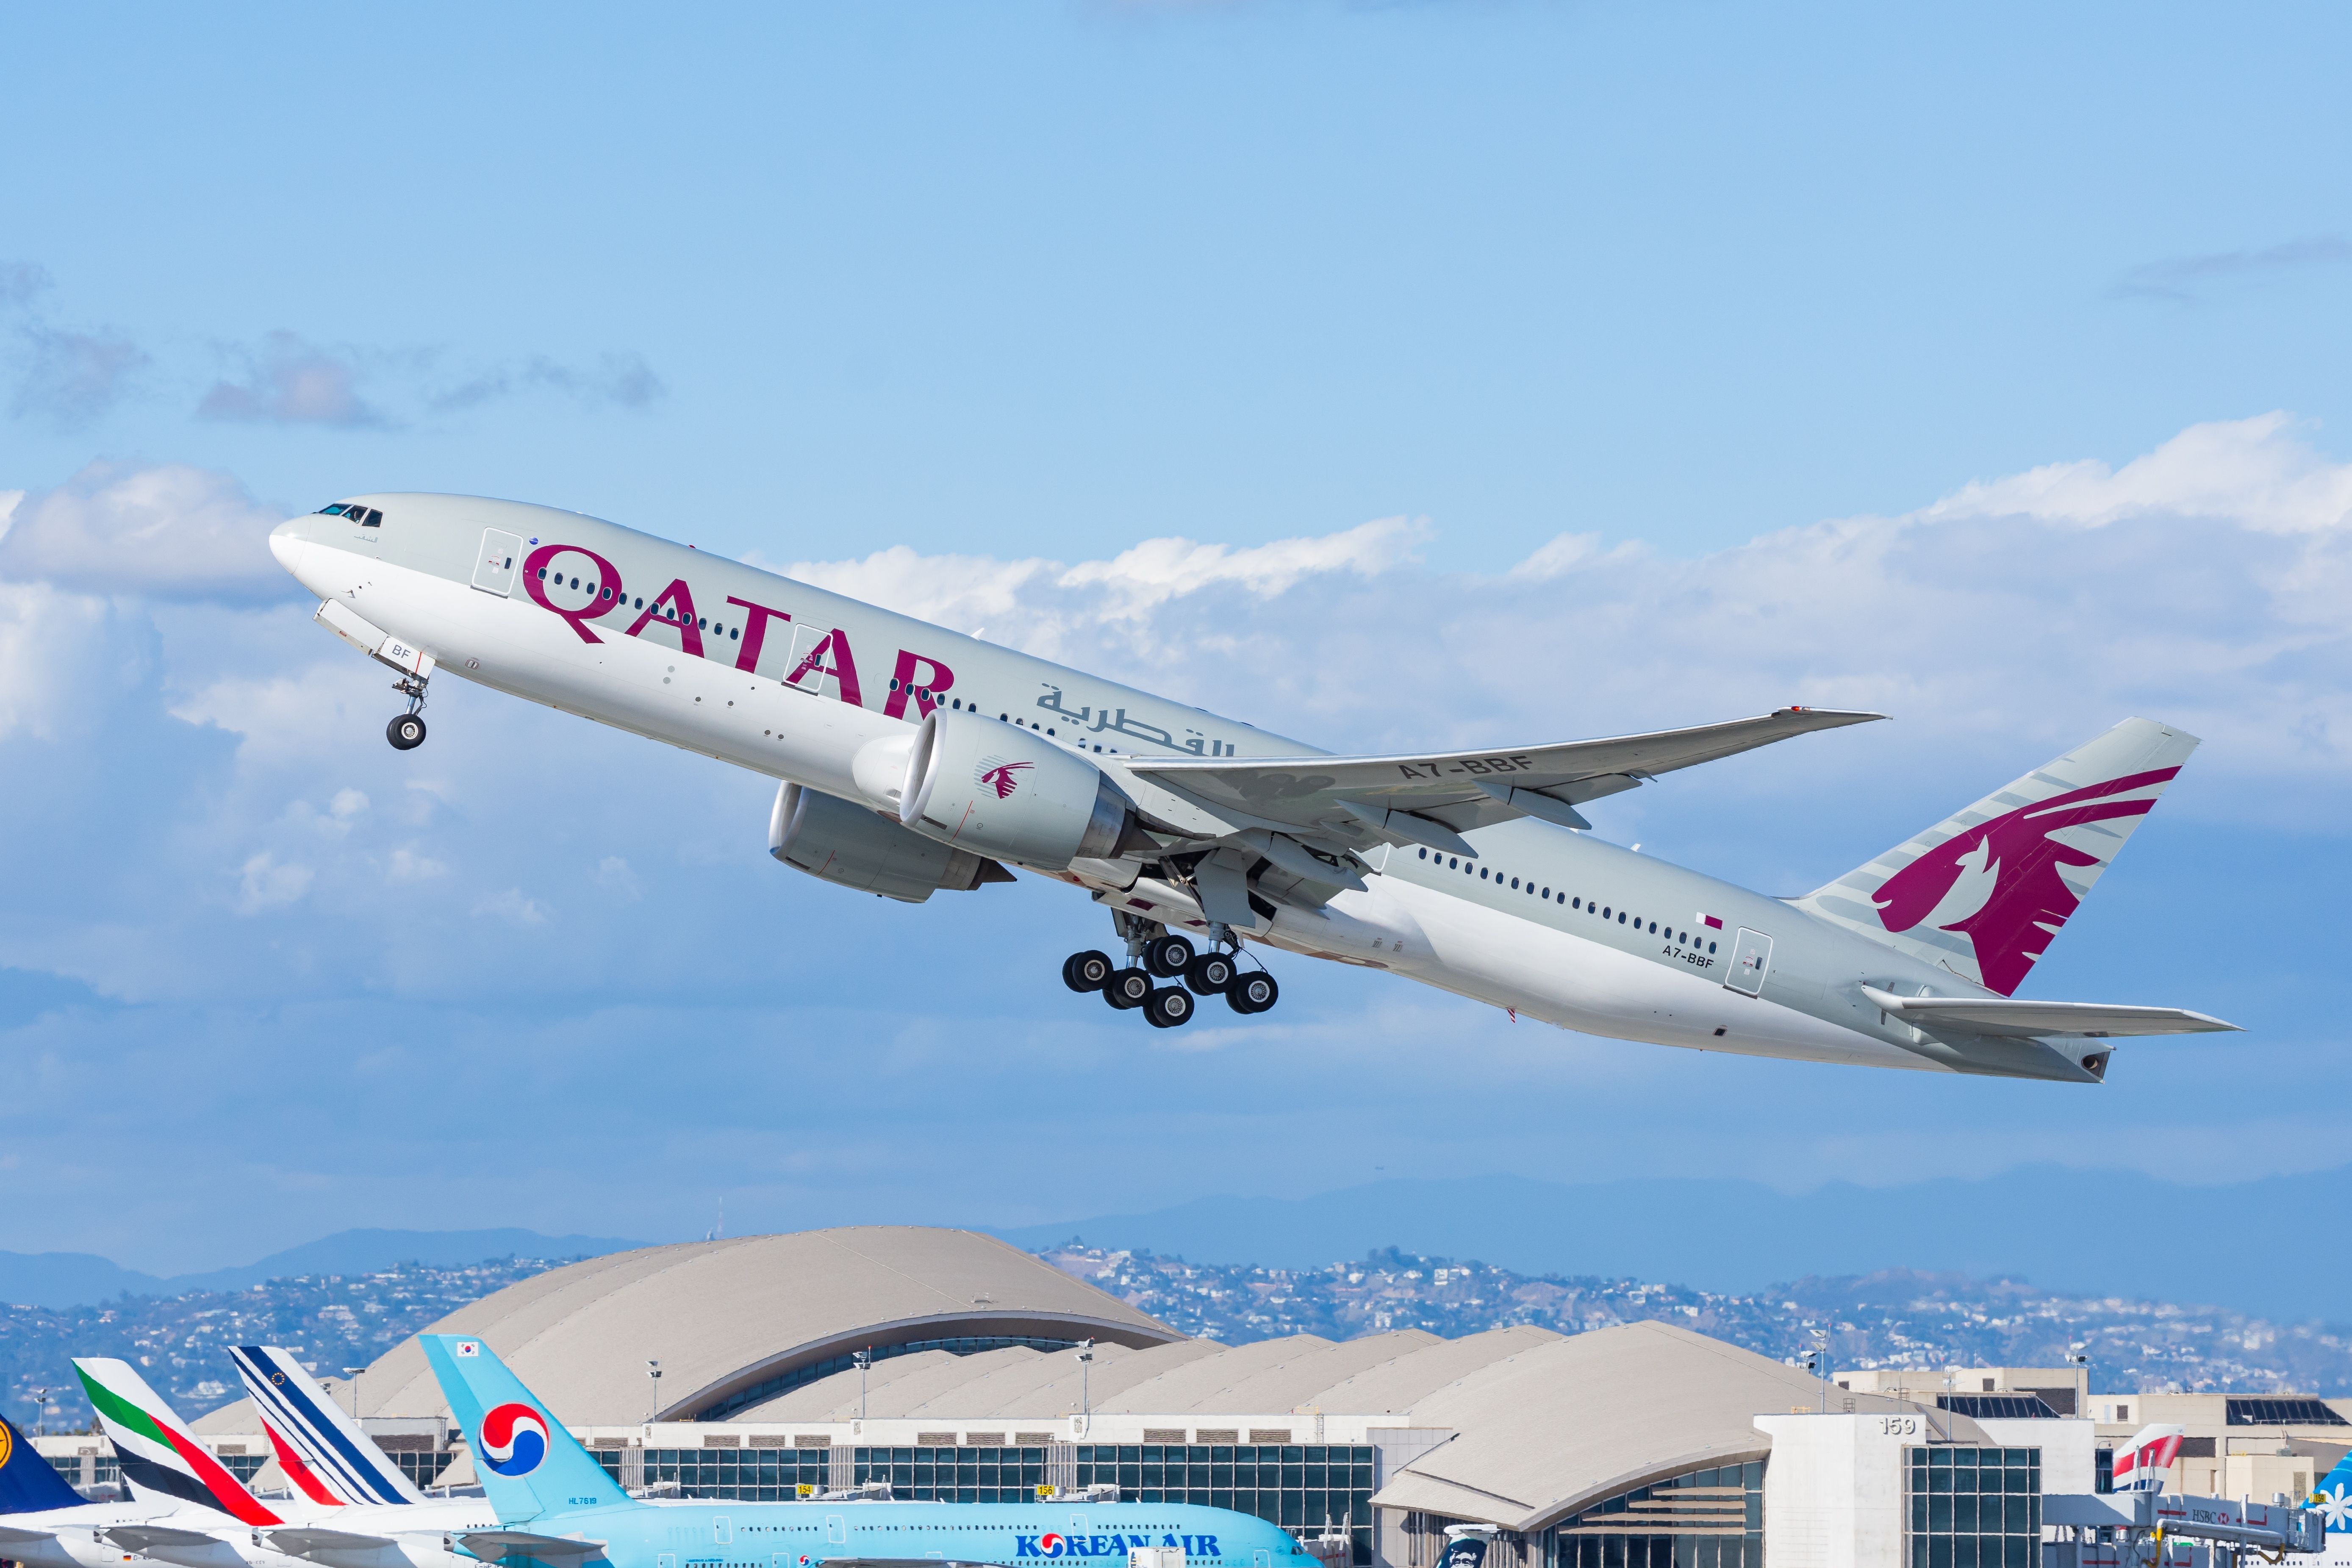 Qatar Airways Boeing 777 is taking off from Los Angeles International Airport (LAX), heading towards its destination in Doha